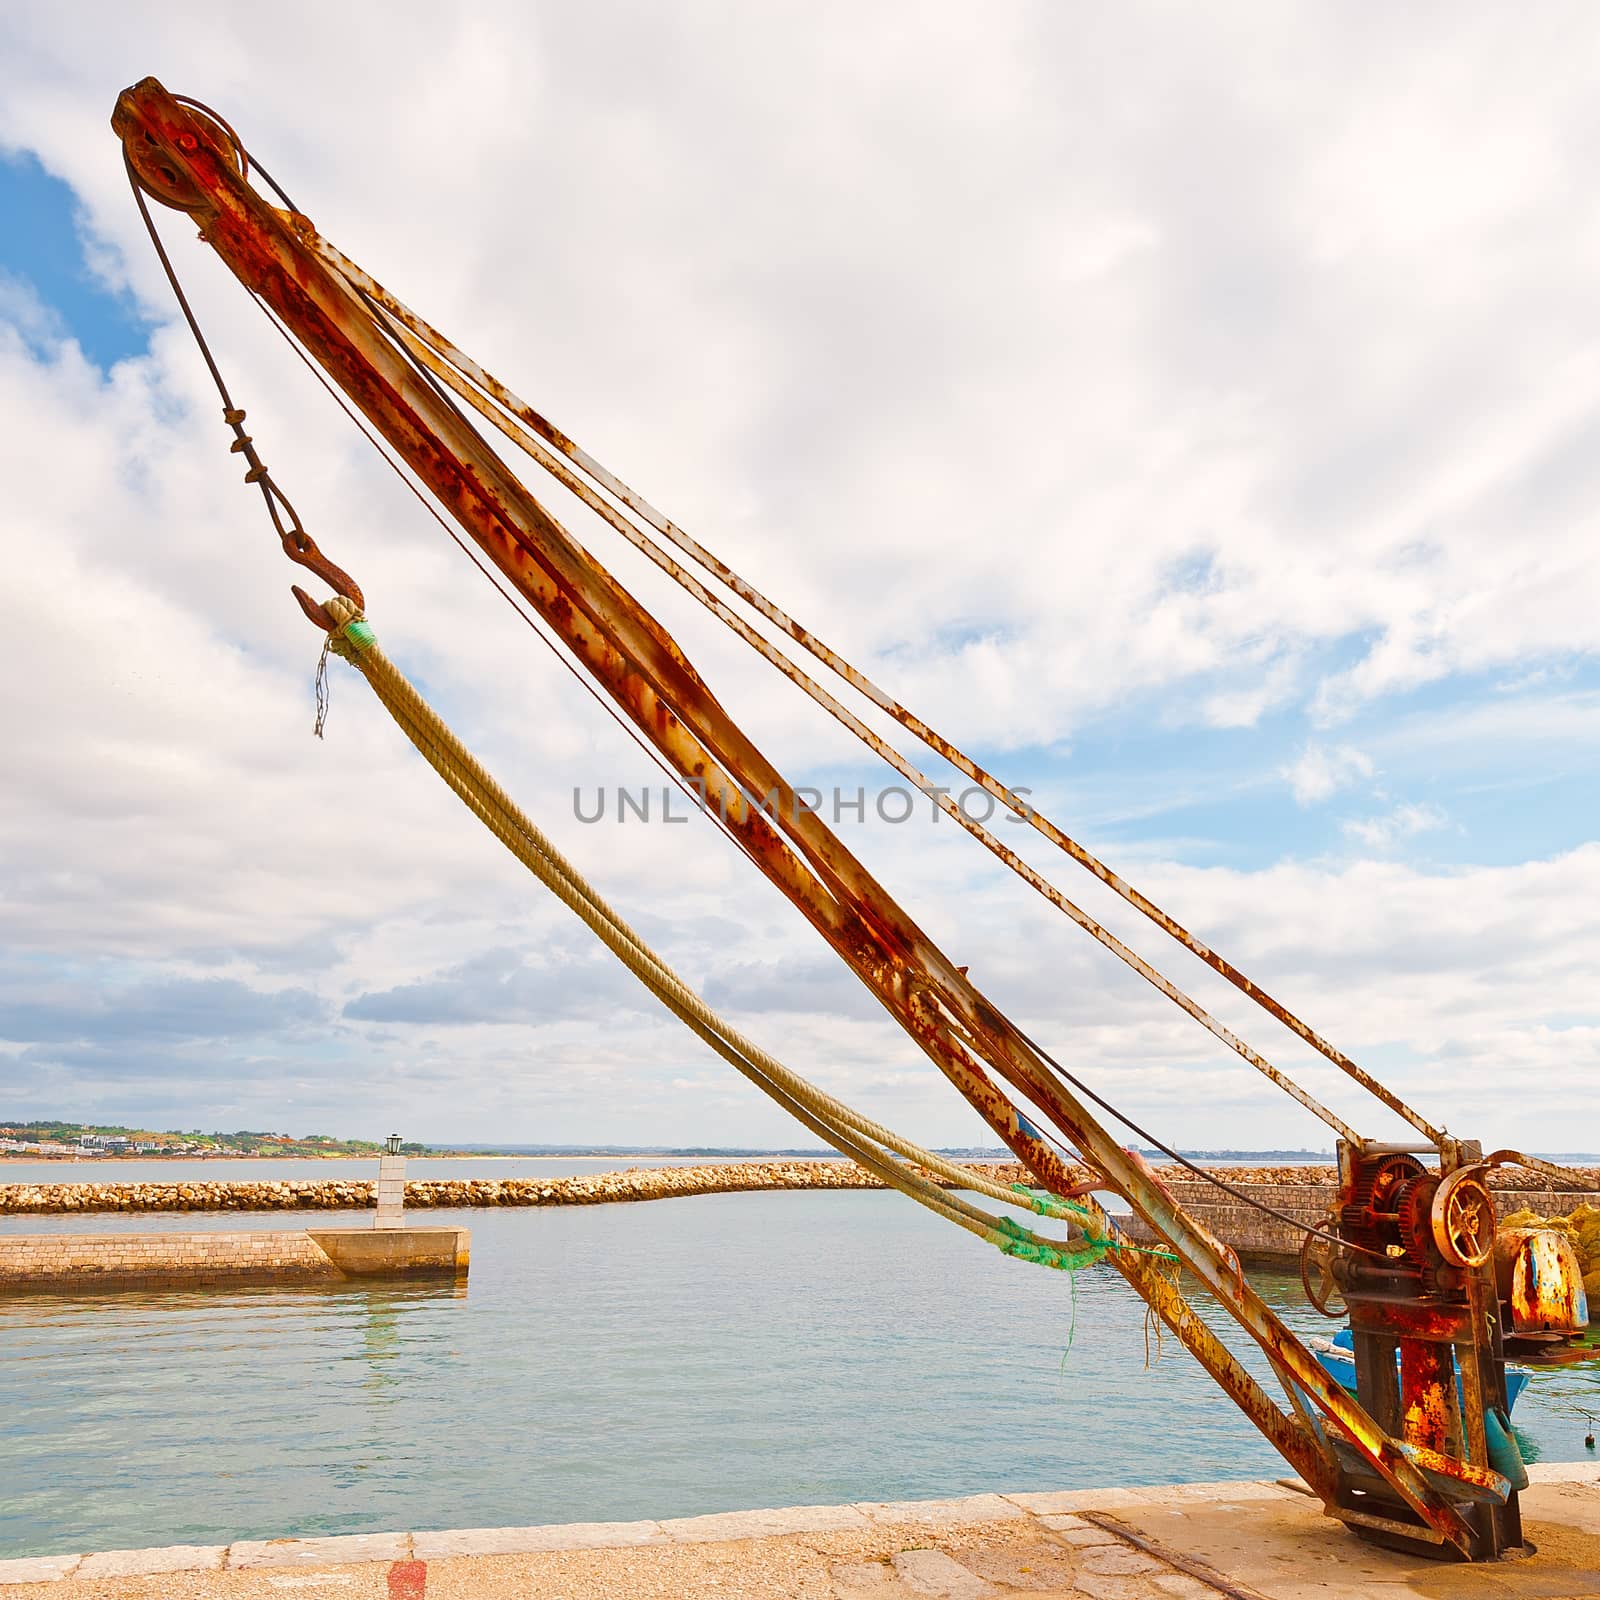 Rusty Mechanism for Launching Boats into the Water in a  Harbor on the Atlantic Coast of Portugal